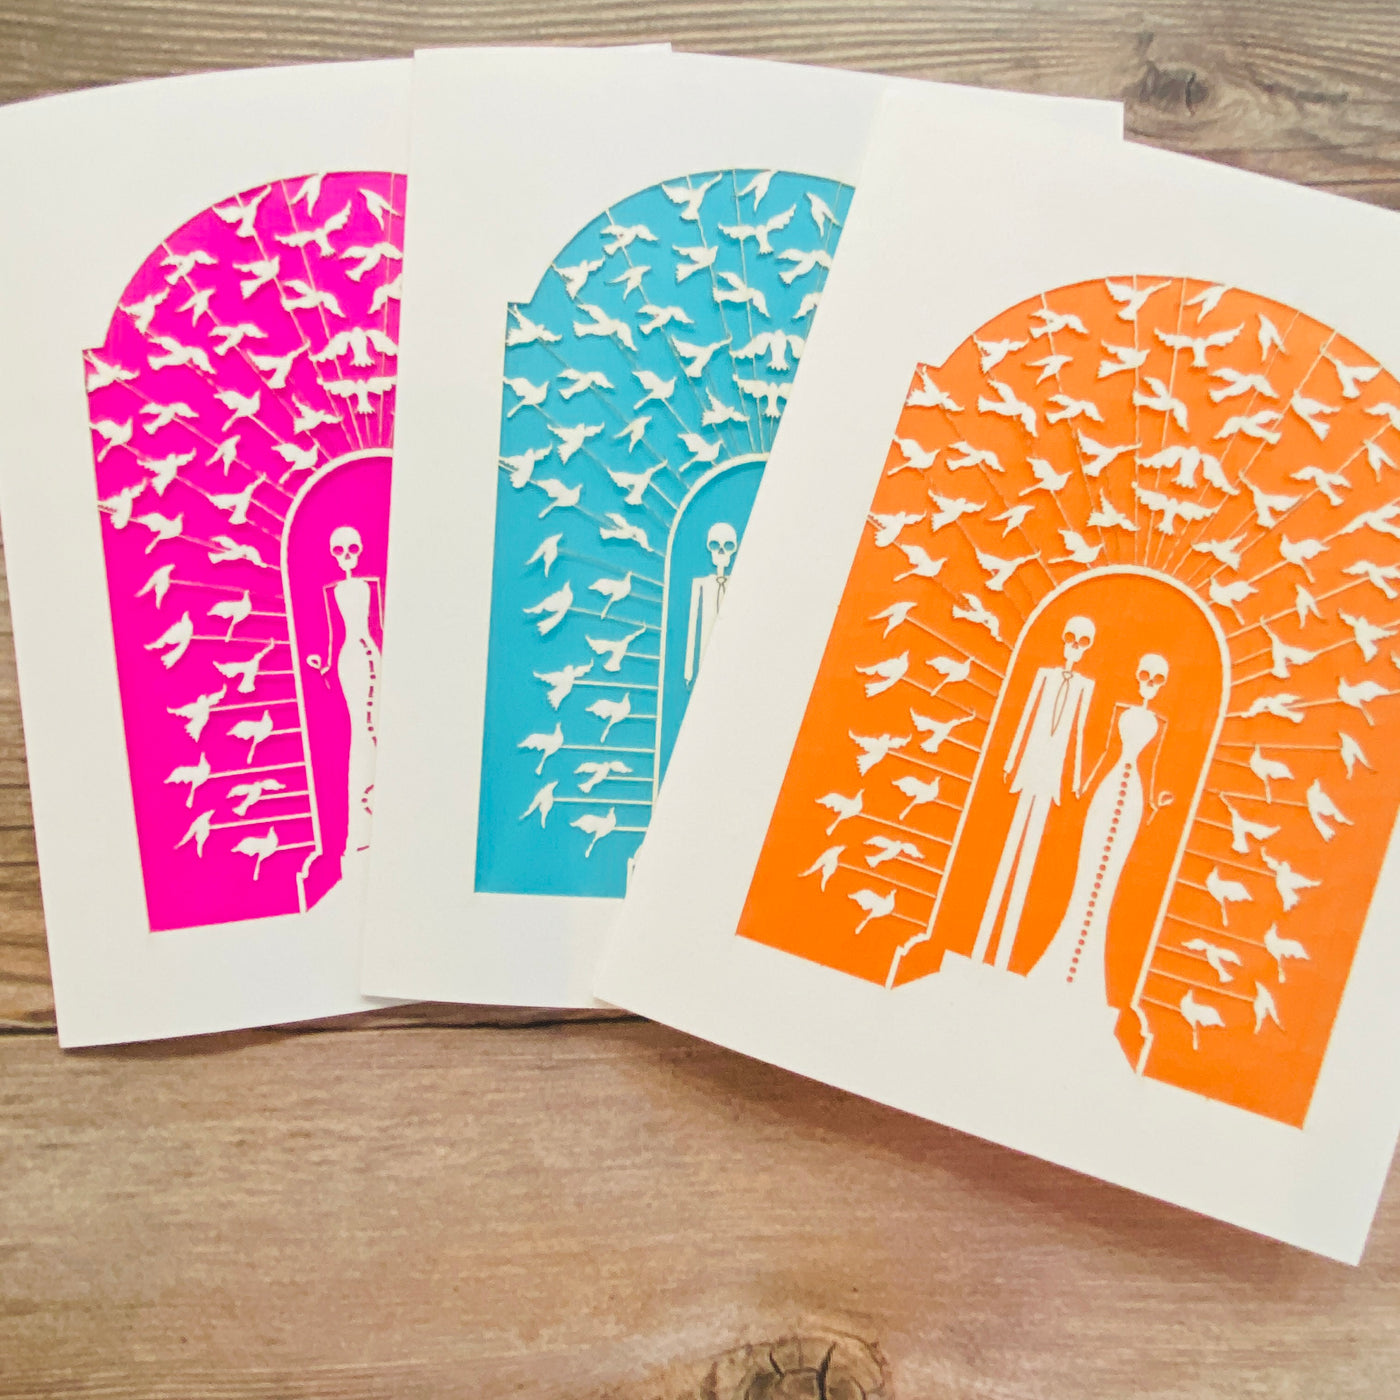 Wedding couple papel picado greeting cards in pink, blue, and orange.